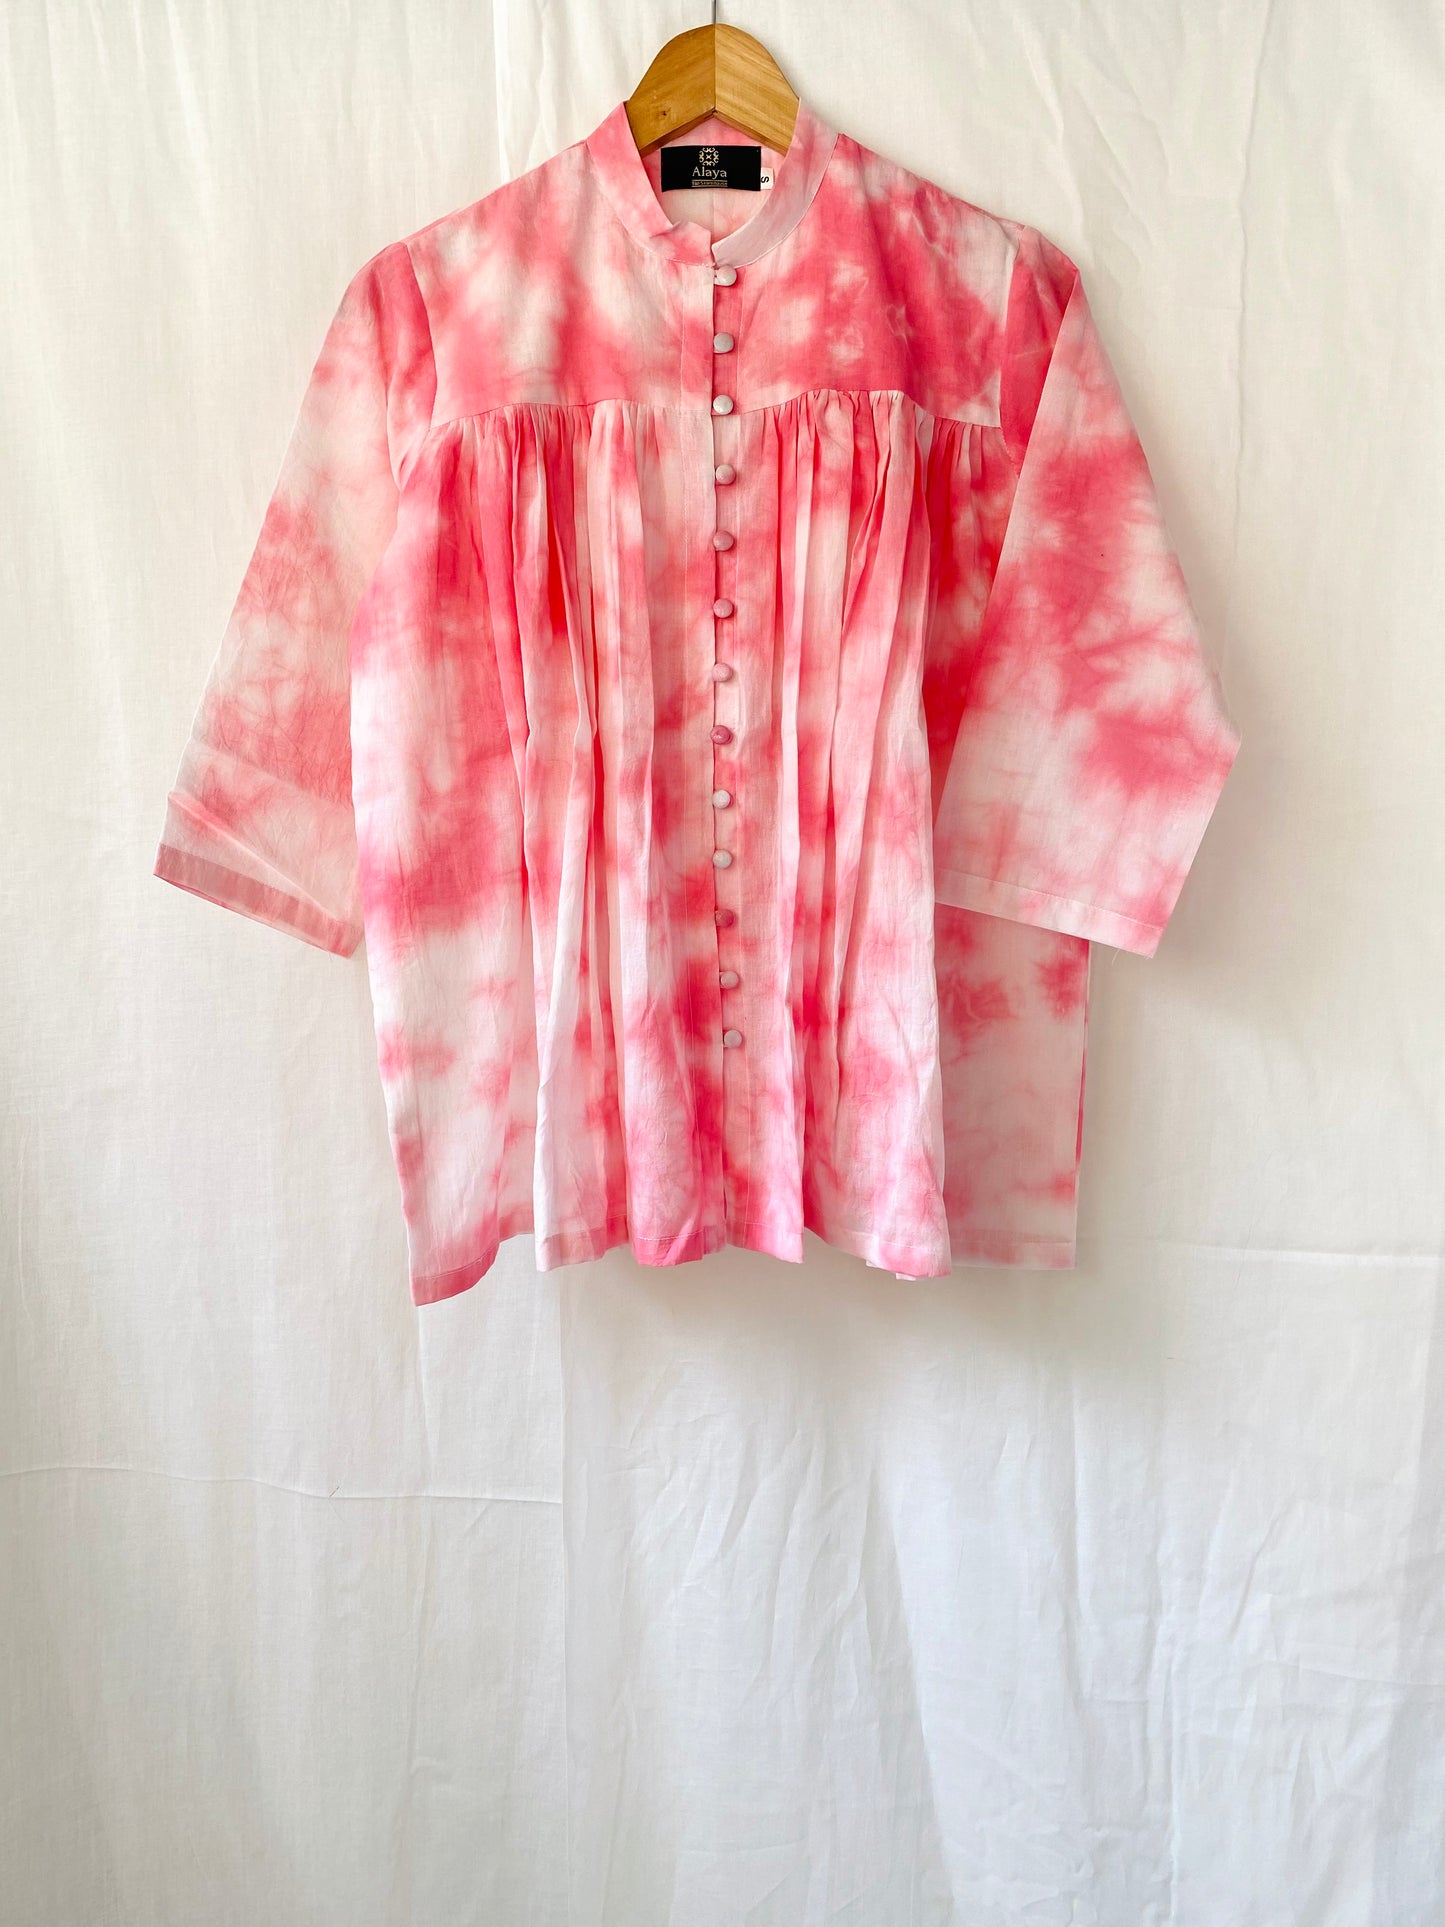 Pink Tie Dye Top with solid White Pants